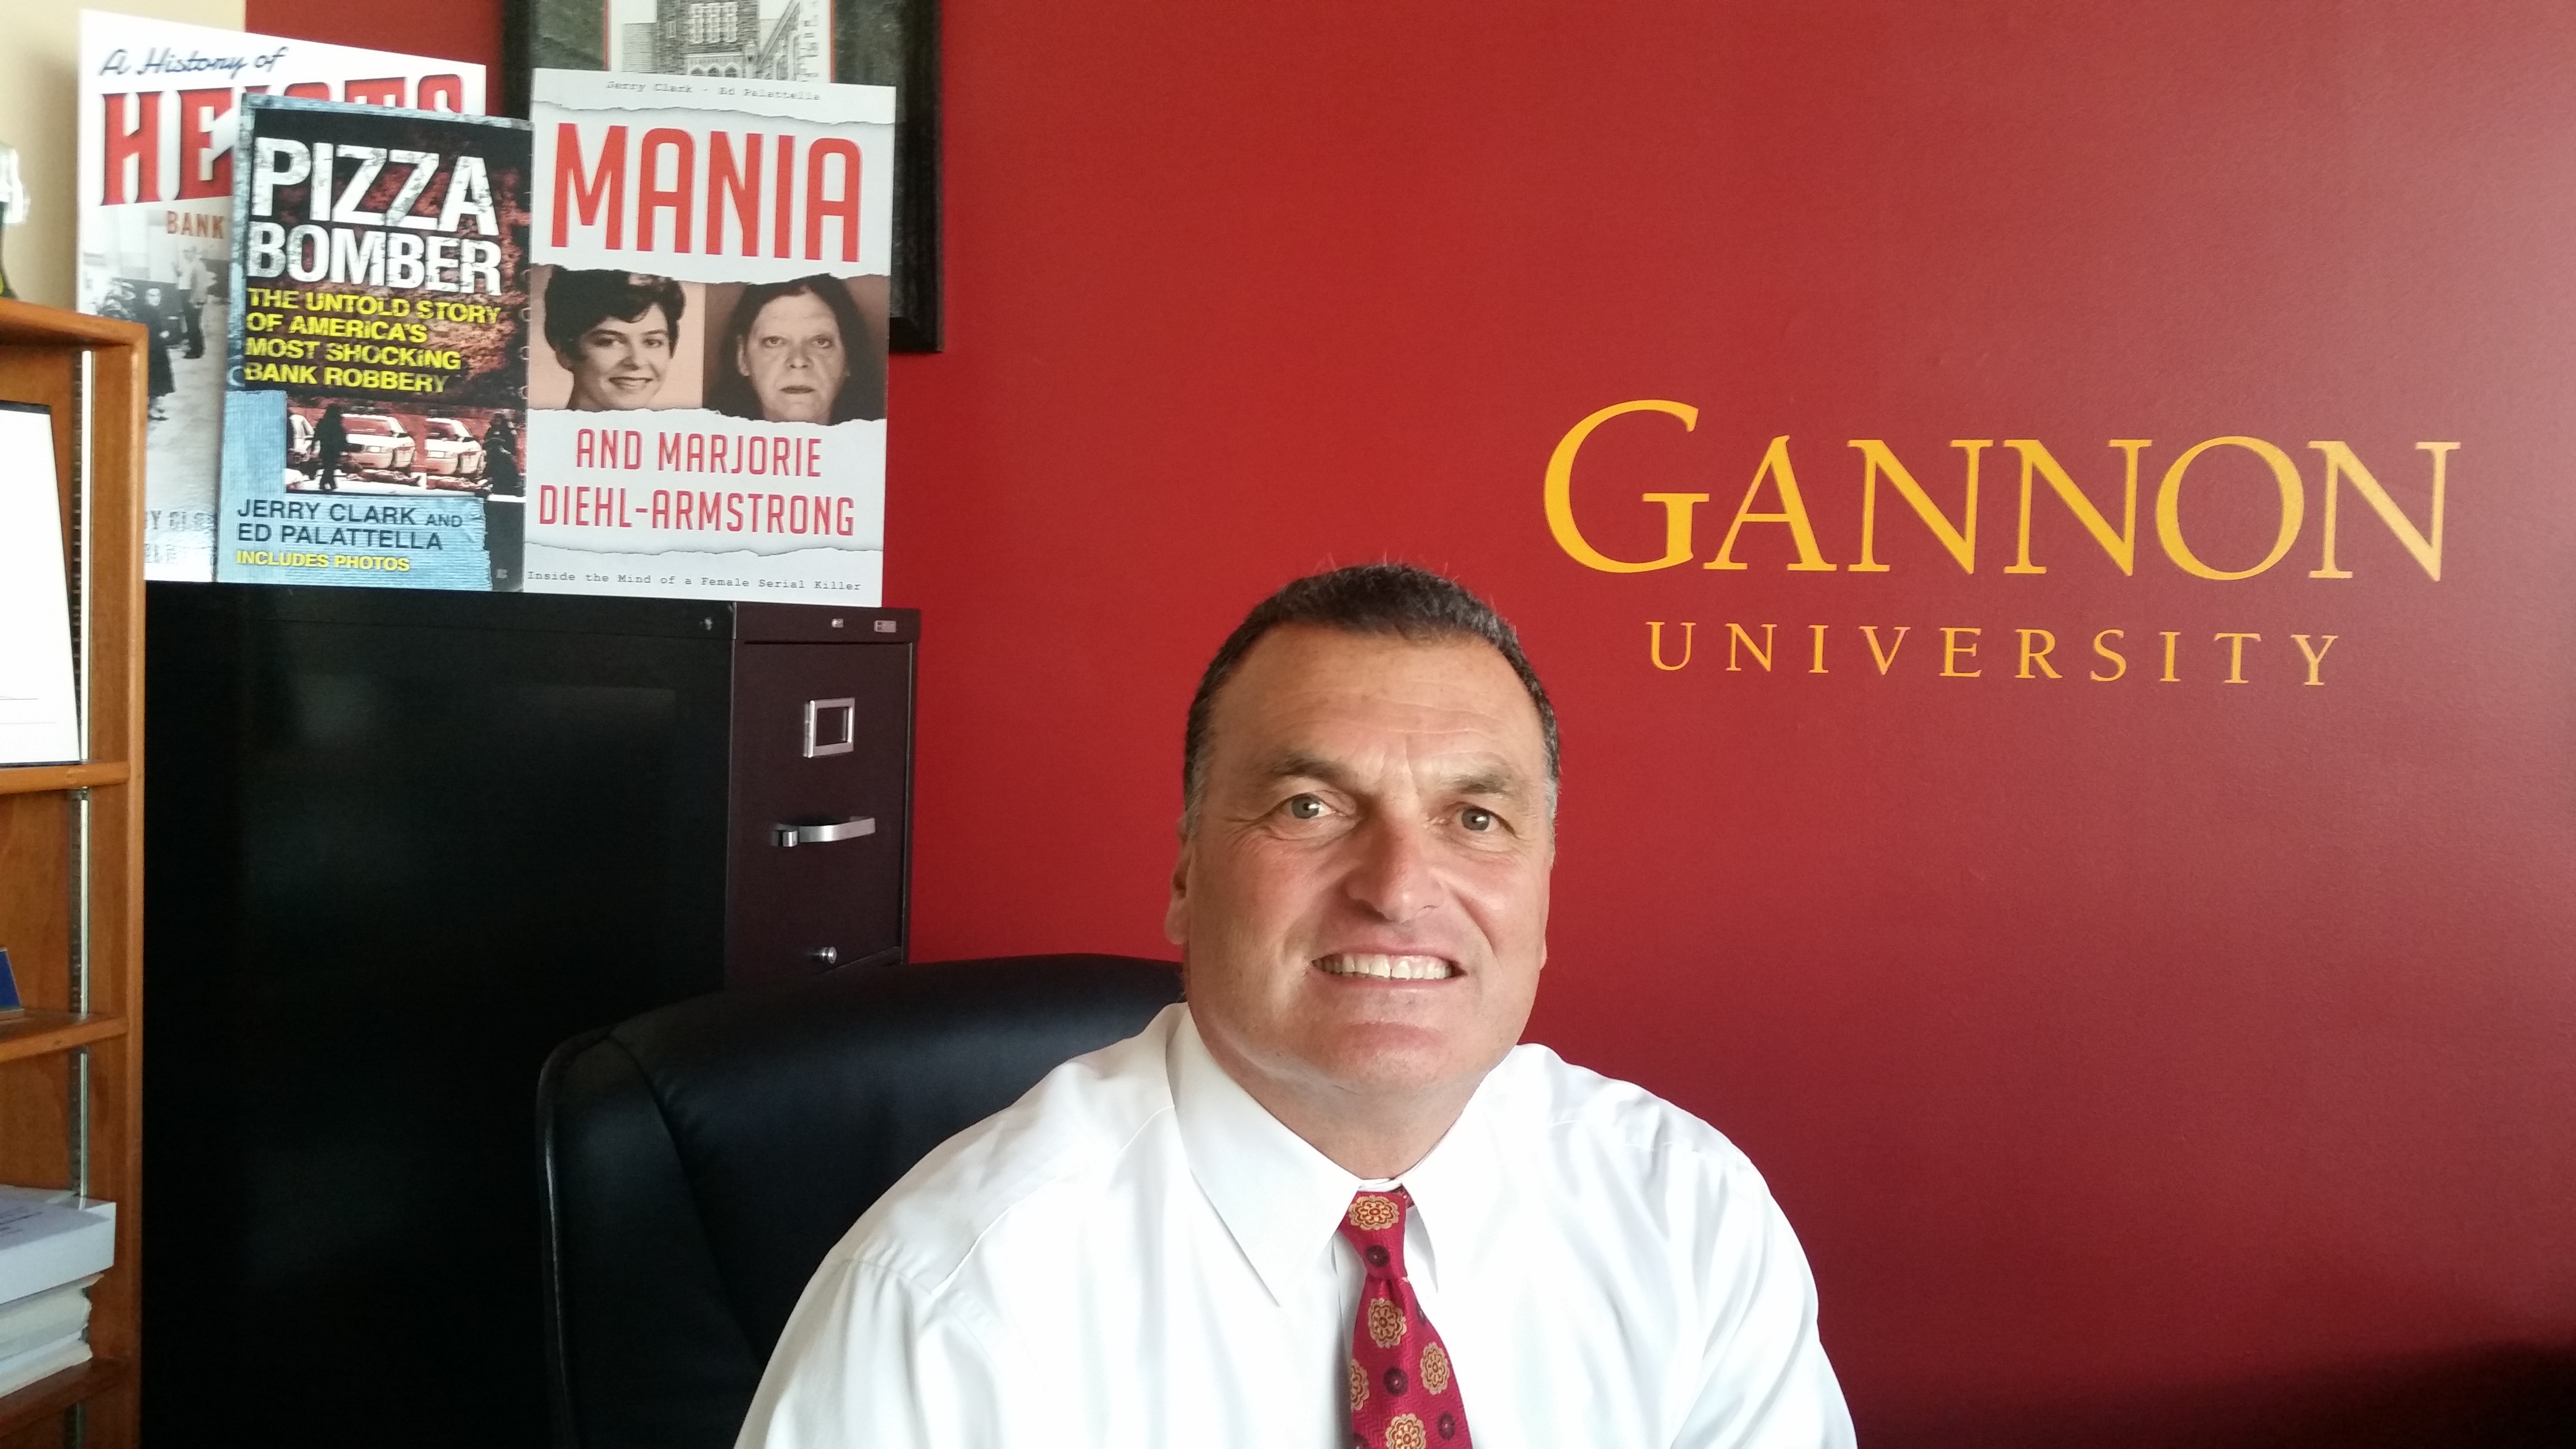 Now retired from law enforcement, Clark teaches at Gannon University in Erie, PA